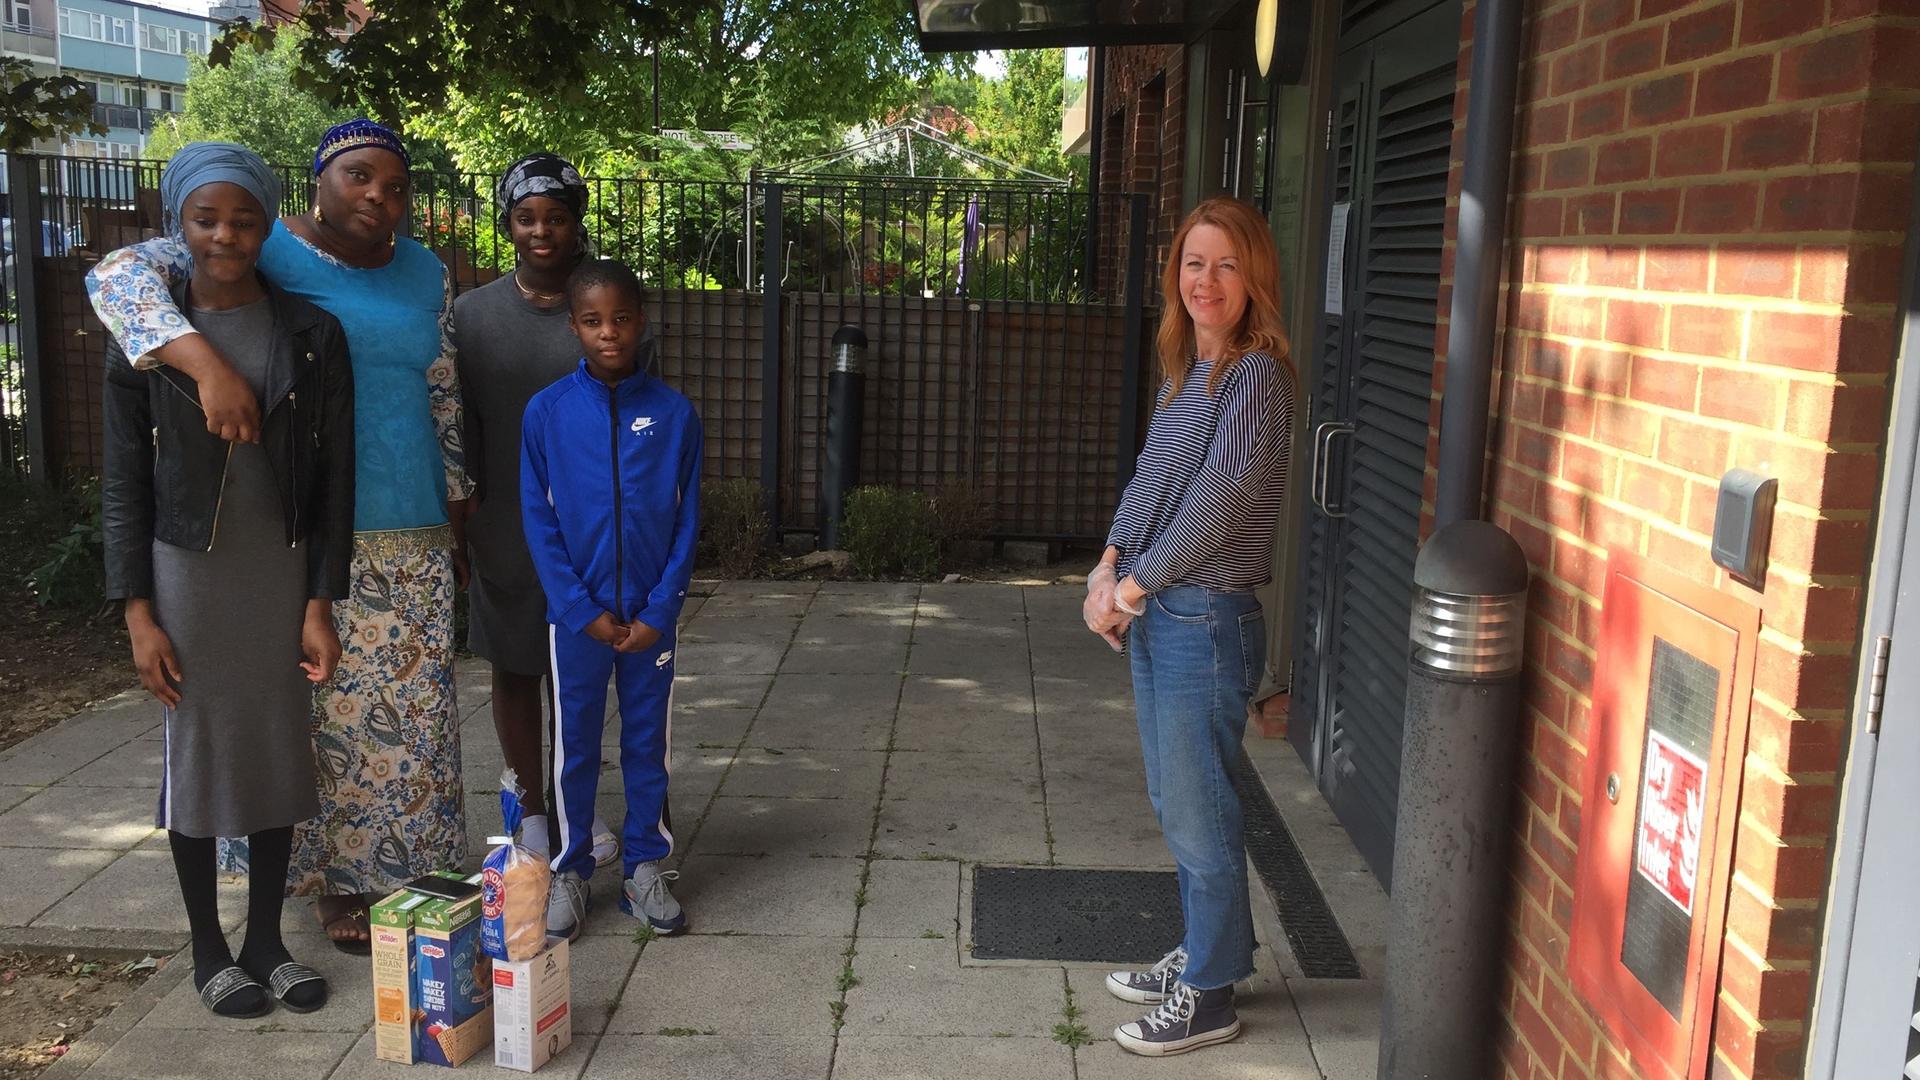 Fi Carrick-Davies poses with Bola Fagbemi and her children Fathia, Aishat and Abdul-Qayyum Akintoyese after dropping off some food for them. Carrick-Davies and the family are extremely close. 